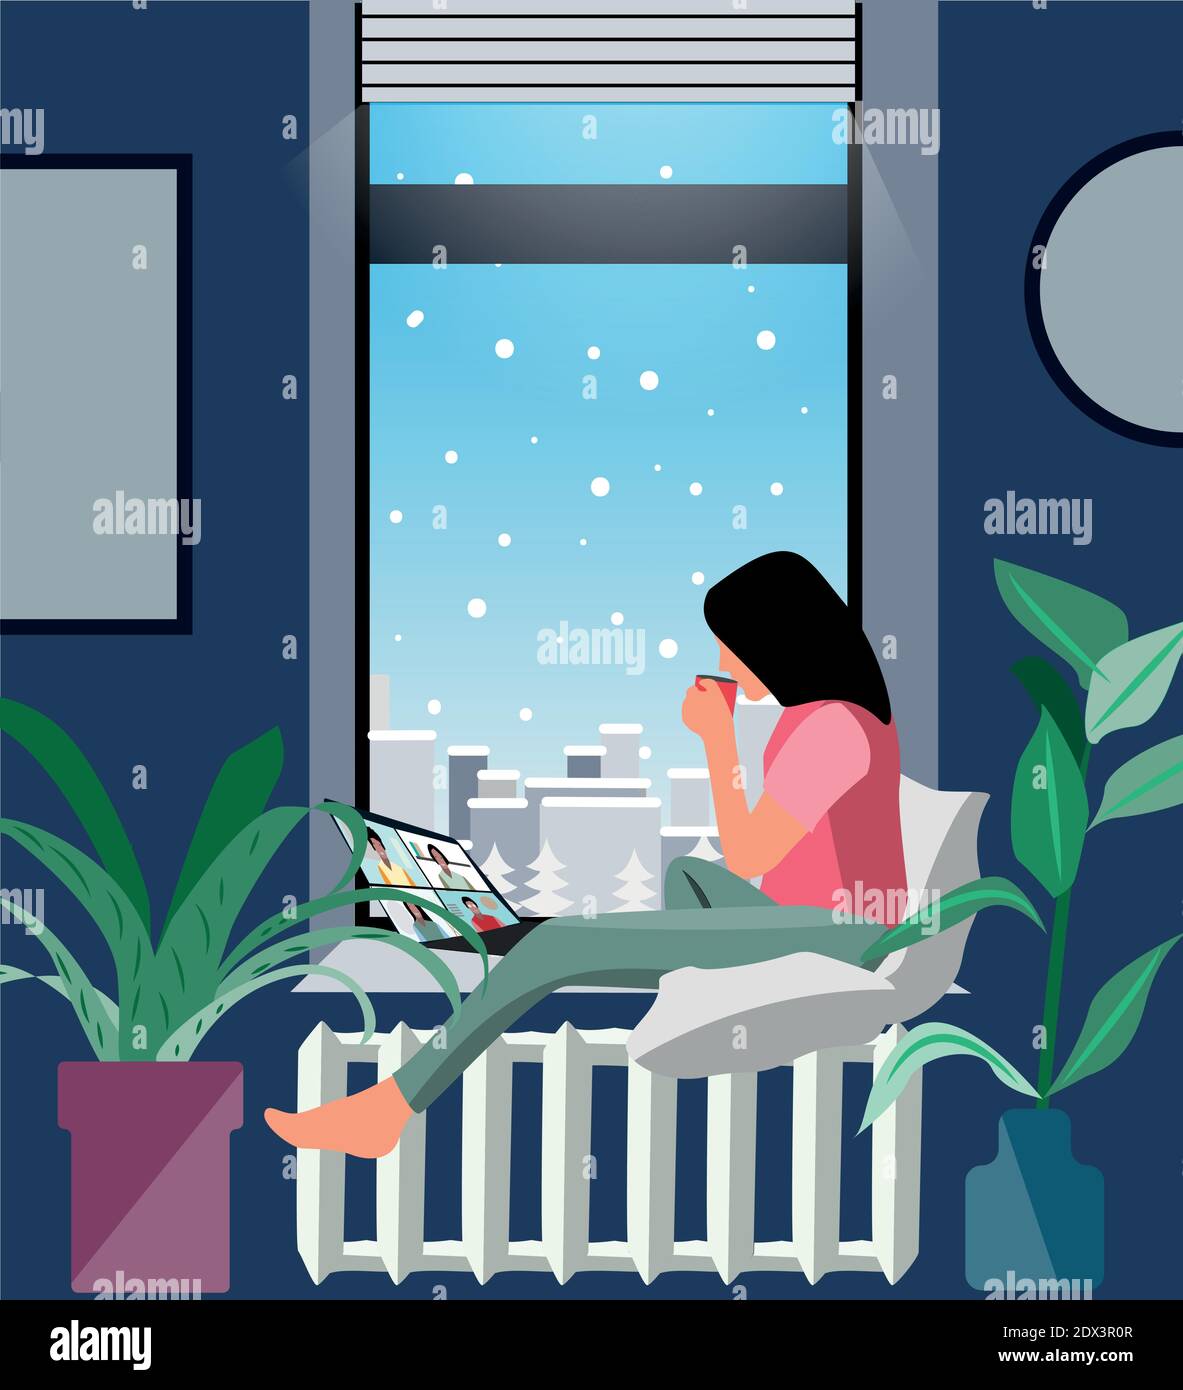 Work at home cozy winter interior workspace editable vector illustration Stock Vector